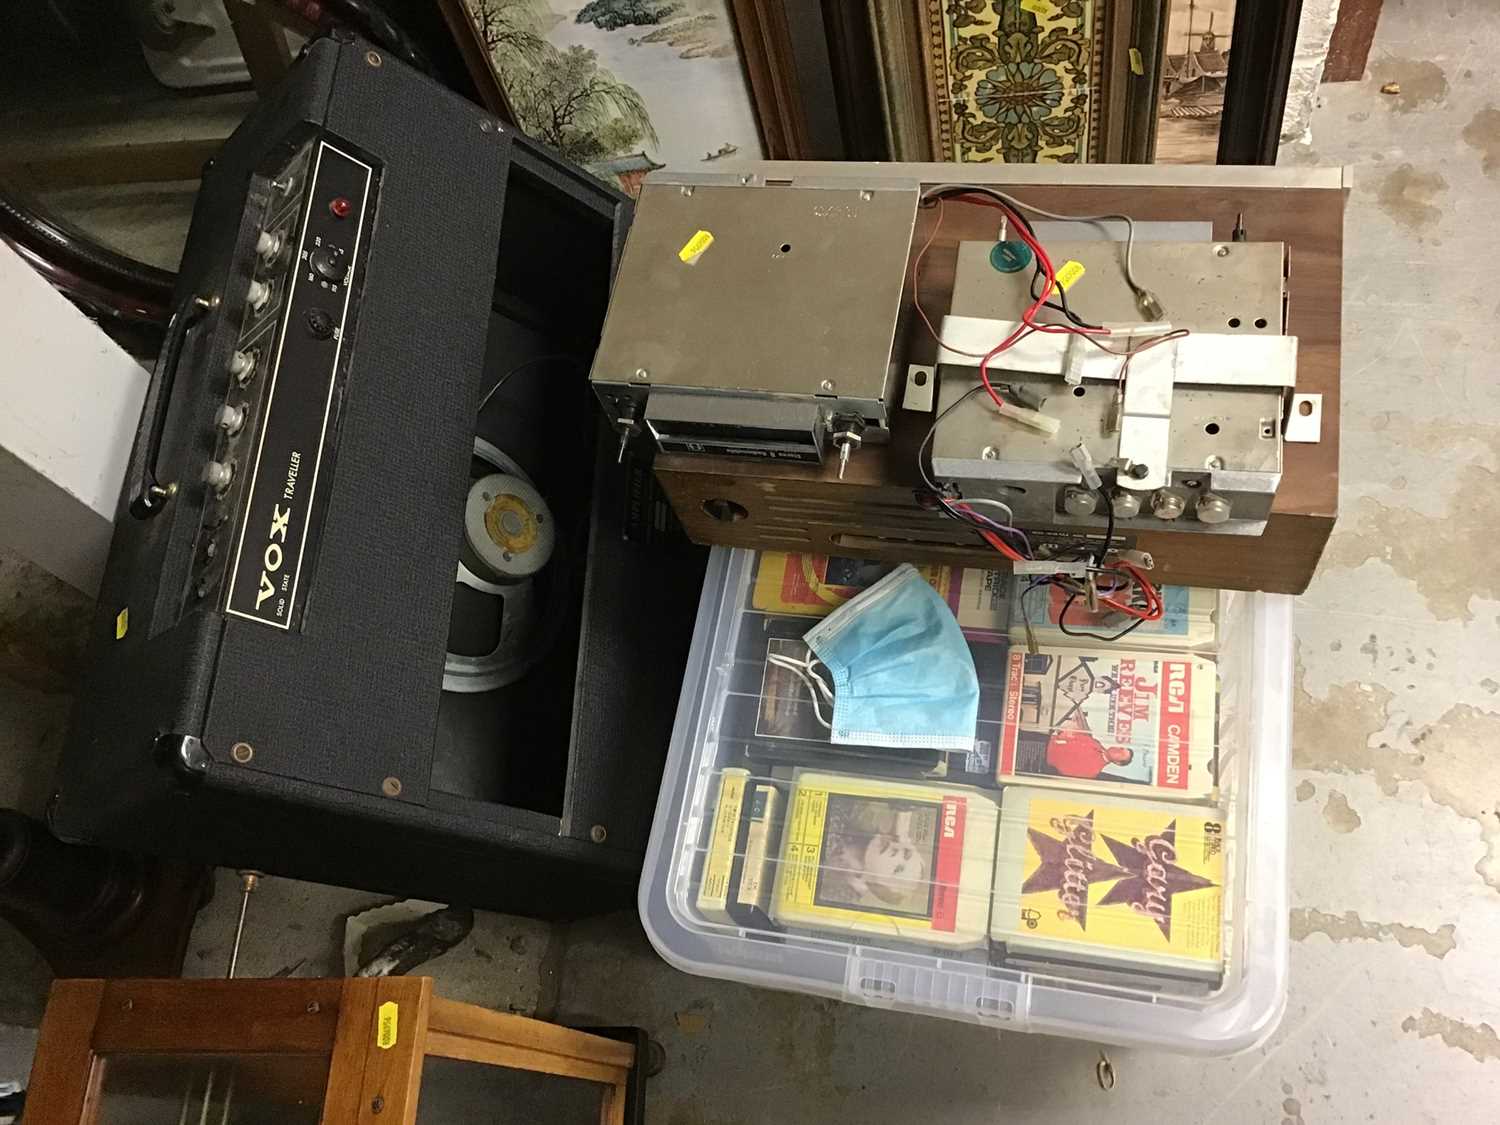 Lot 363 - Vox amplifier, 8 track tapes together with a JVC Nivico 8 track stereo cartridge recorder